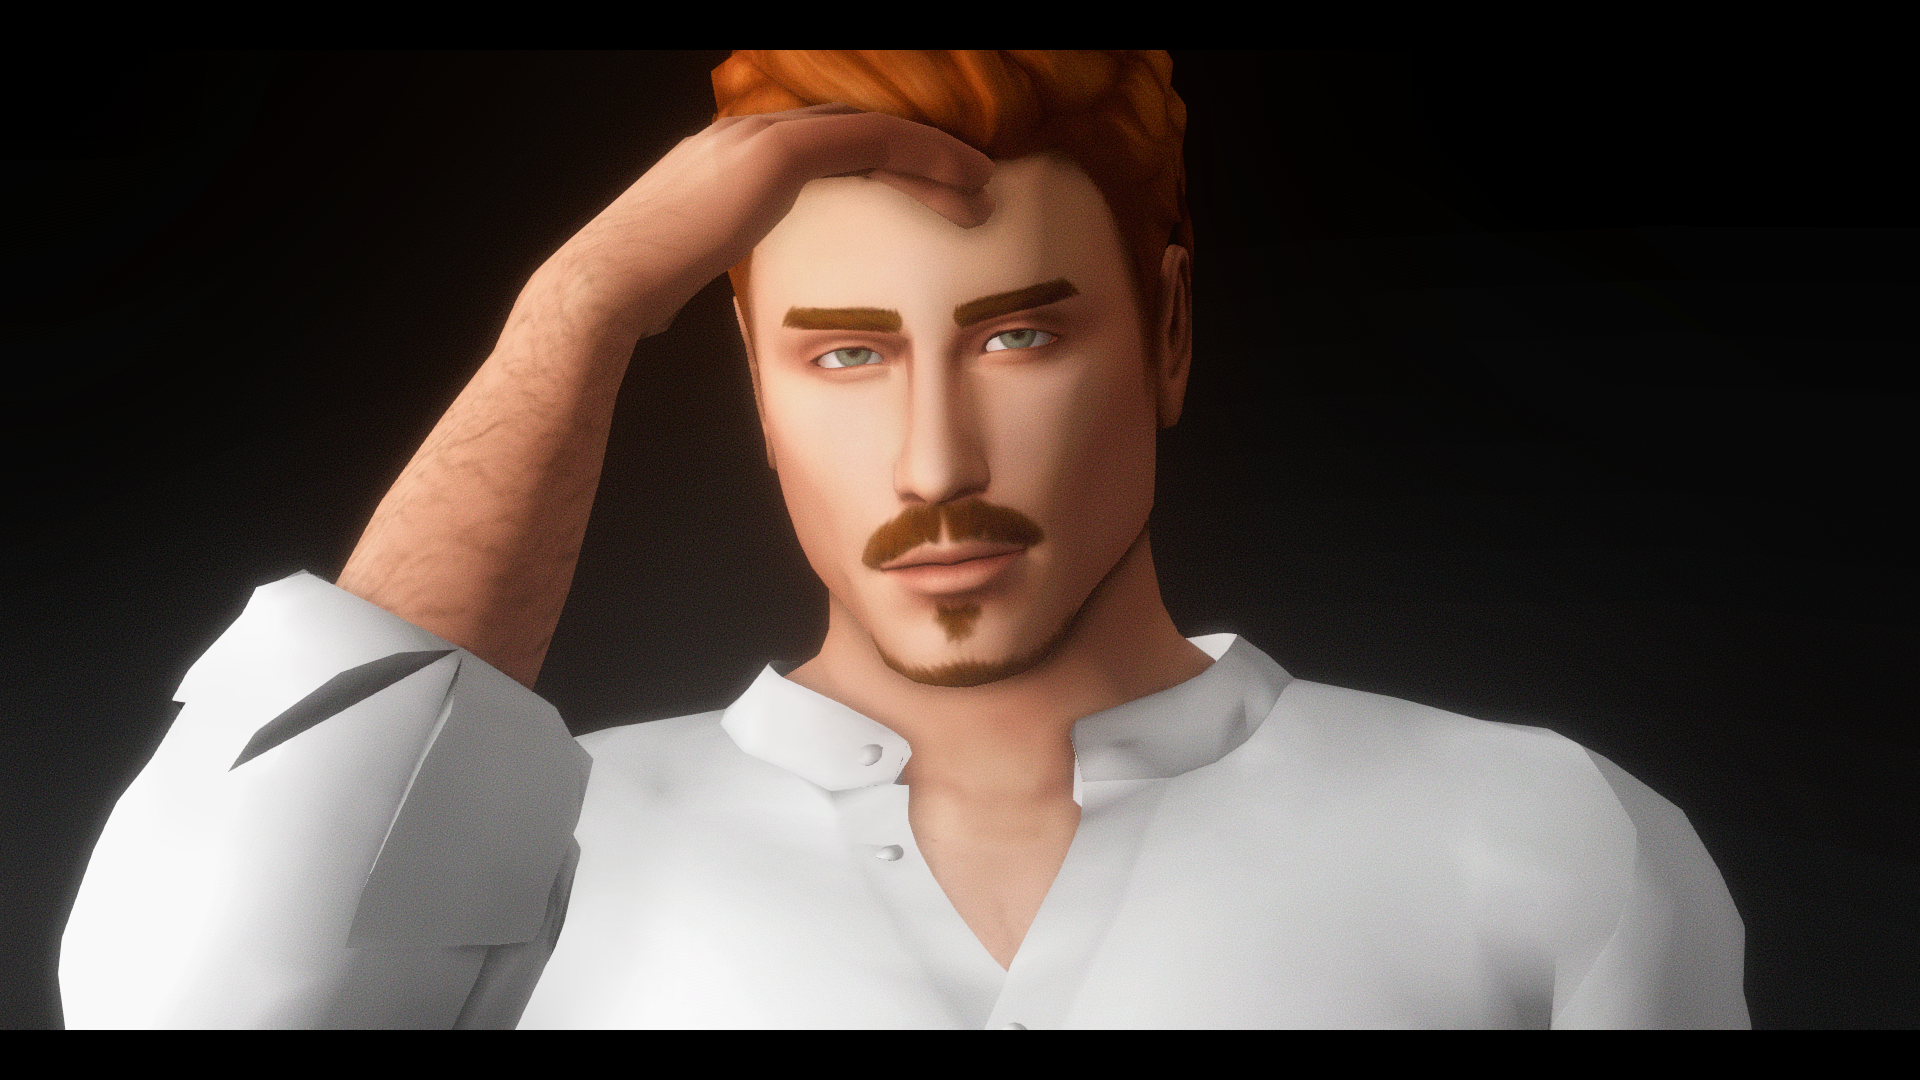 Share Your Male Sims Page 145 The Sims 4 General Discussion